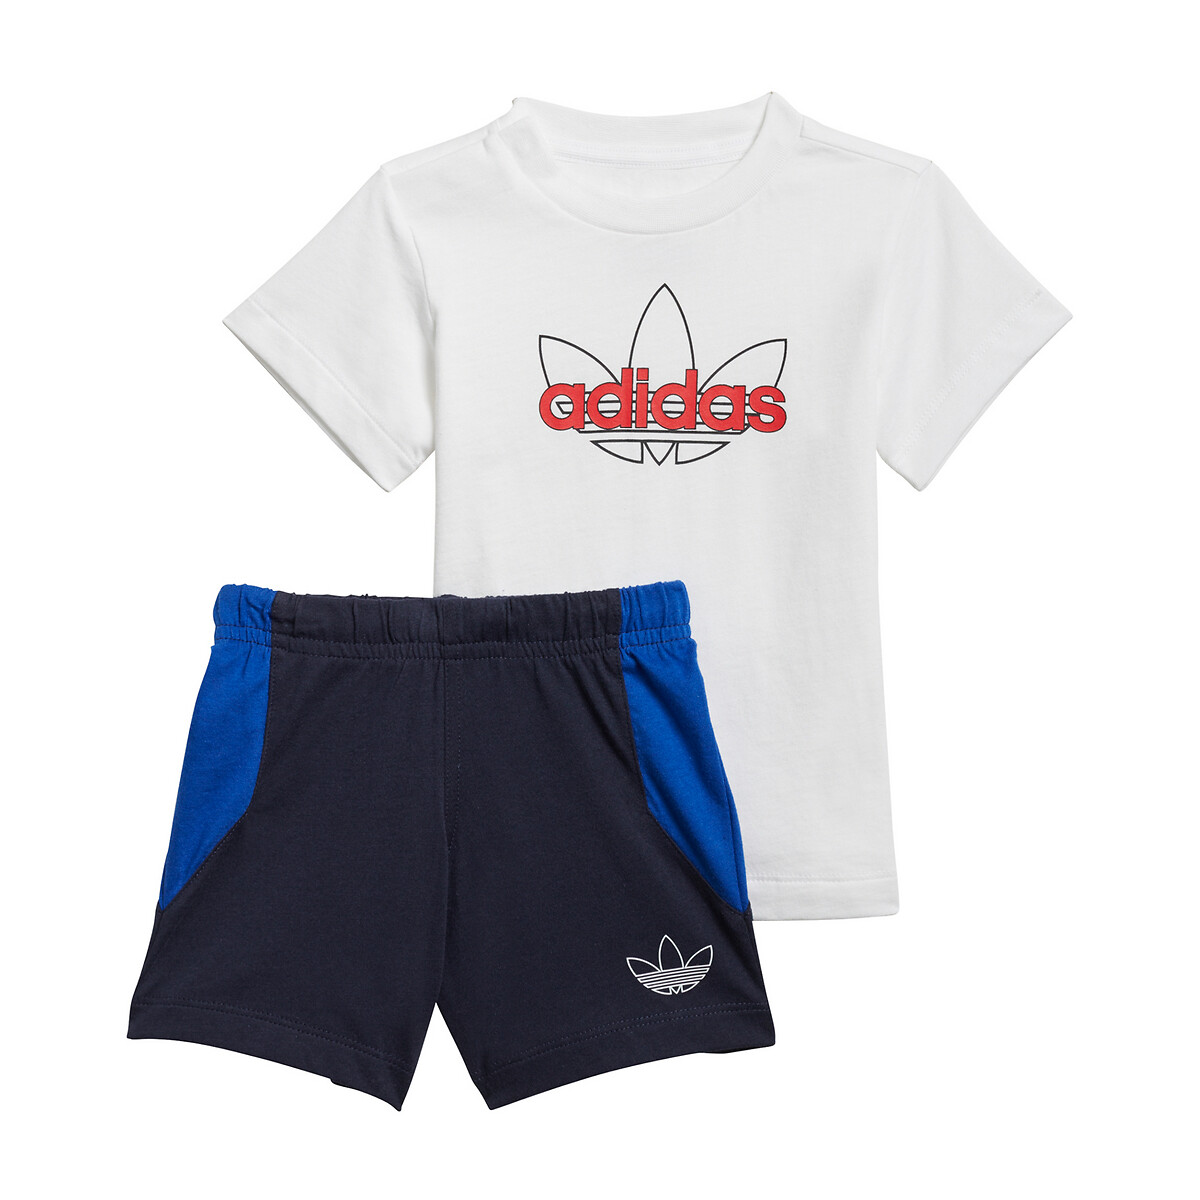 Cotton t-shirt/shorts outfit, 3 months-4 years , white + navy, Adidas ...